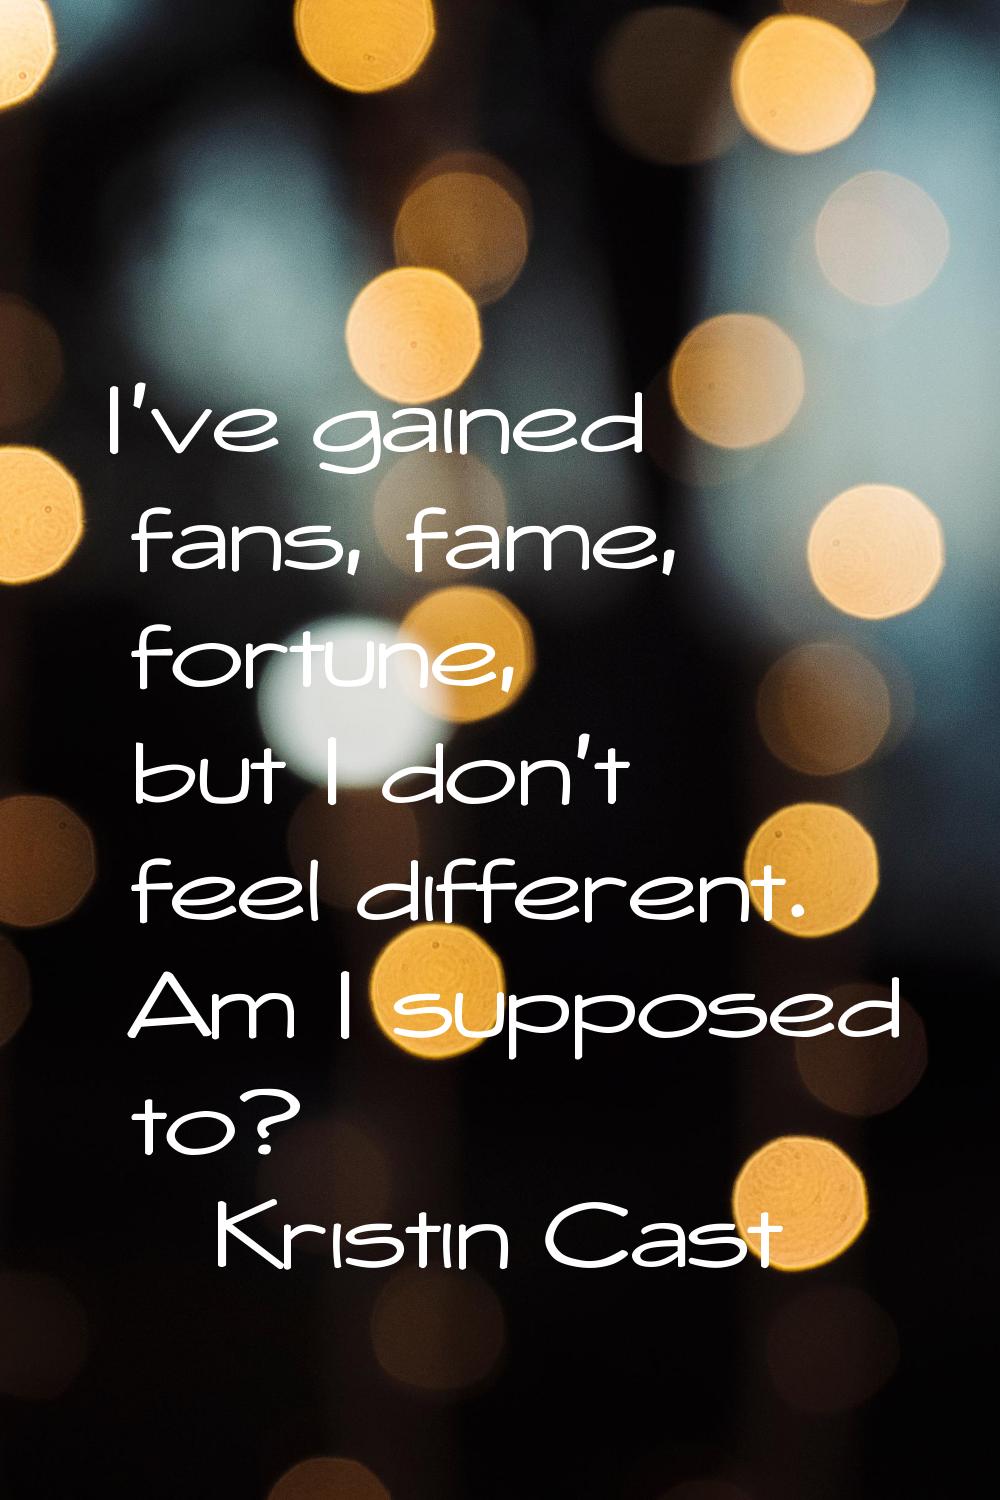 I've gained fans, fame, fortune, but I don't feel different. Am I supposed to?